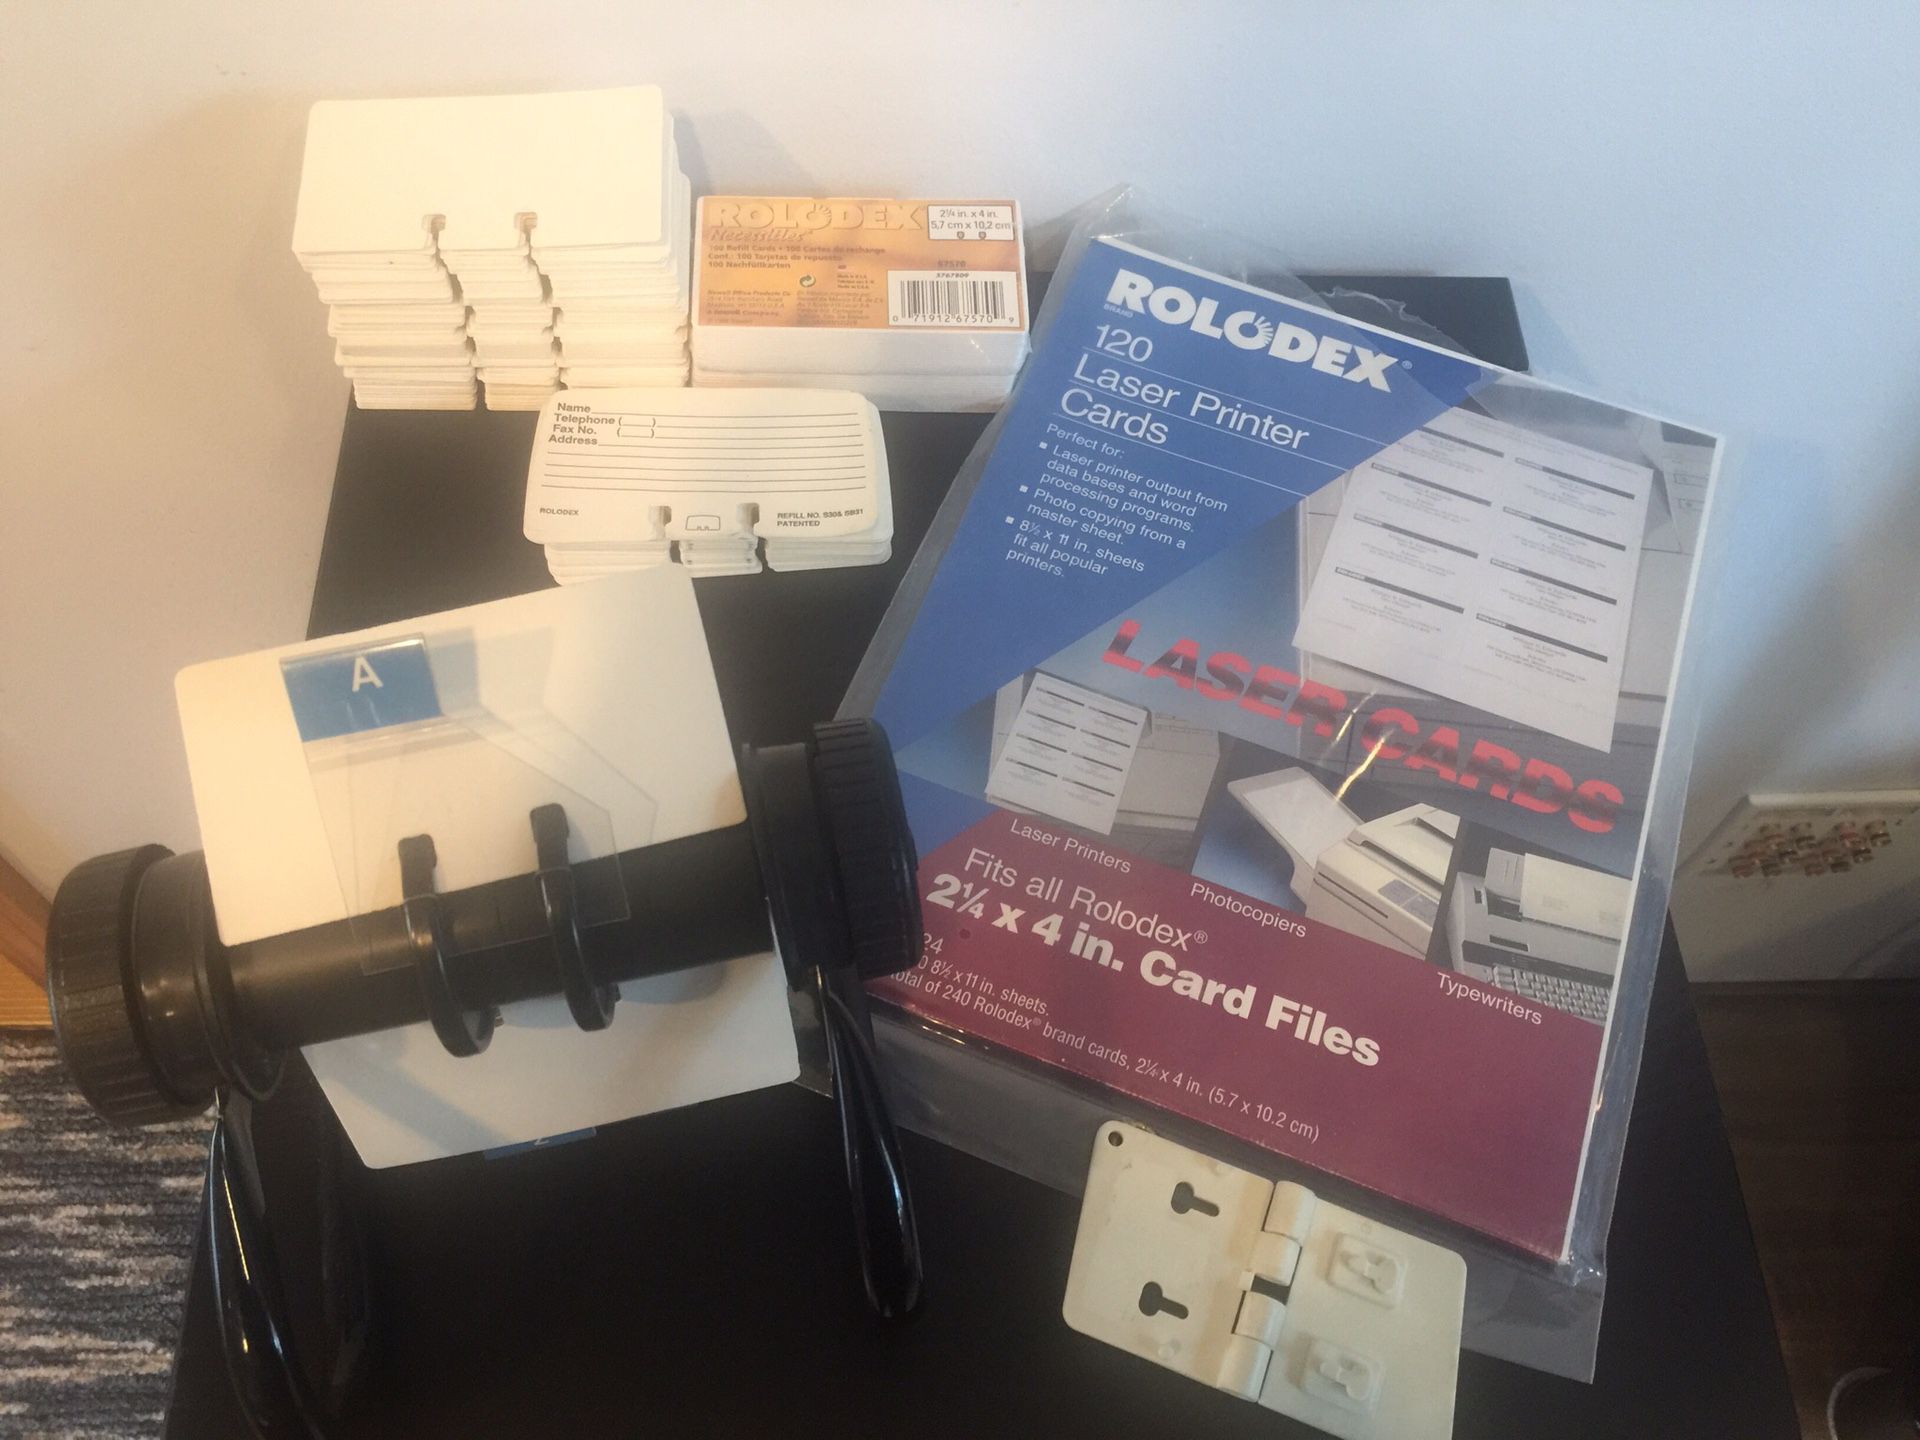 Rolodex Card File with Blank Cards